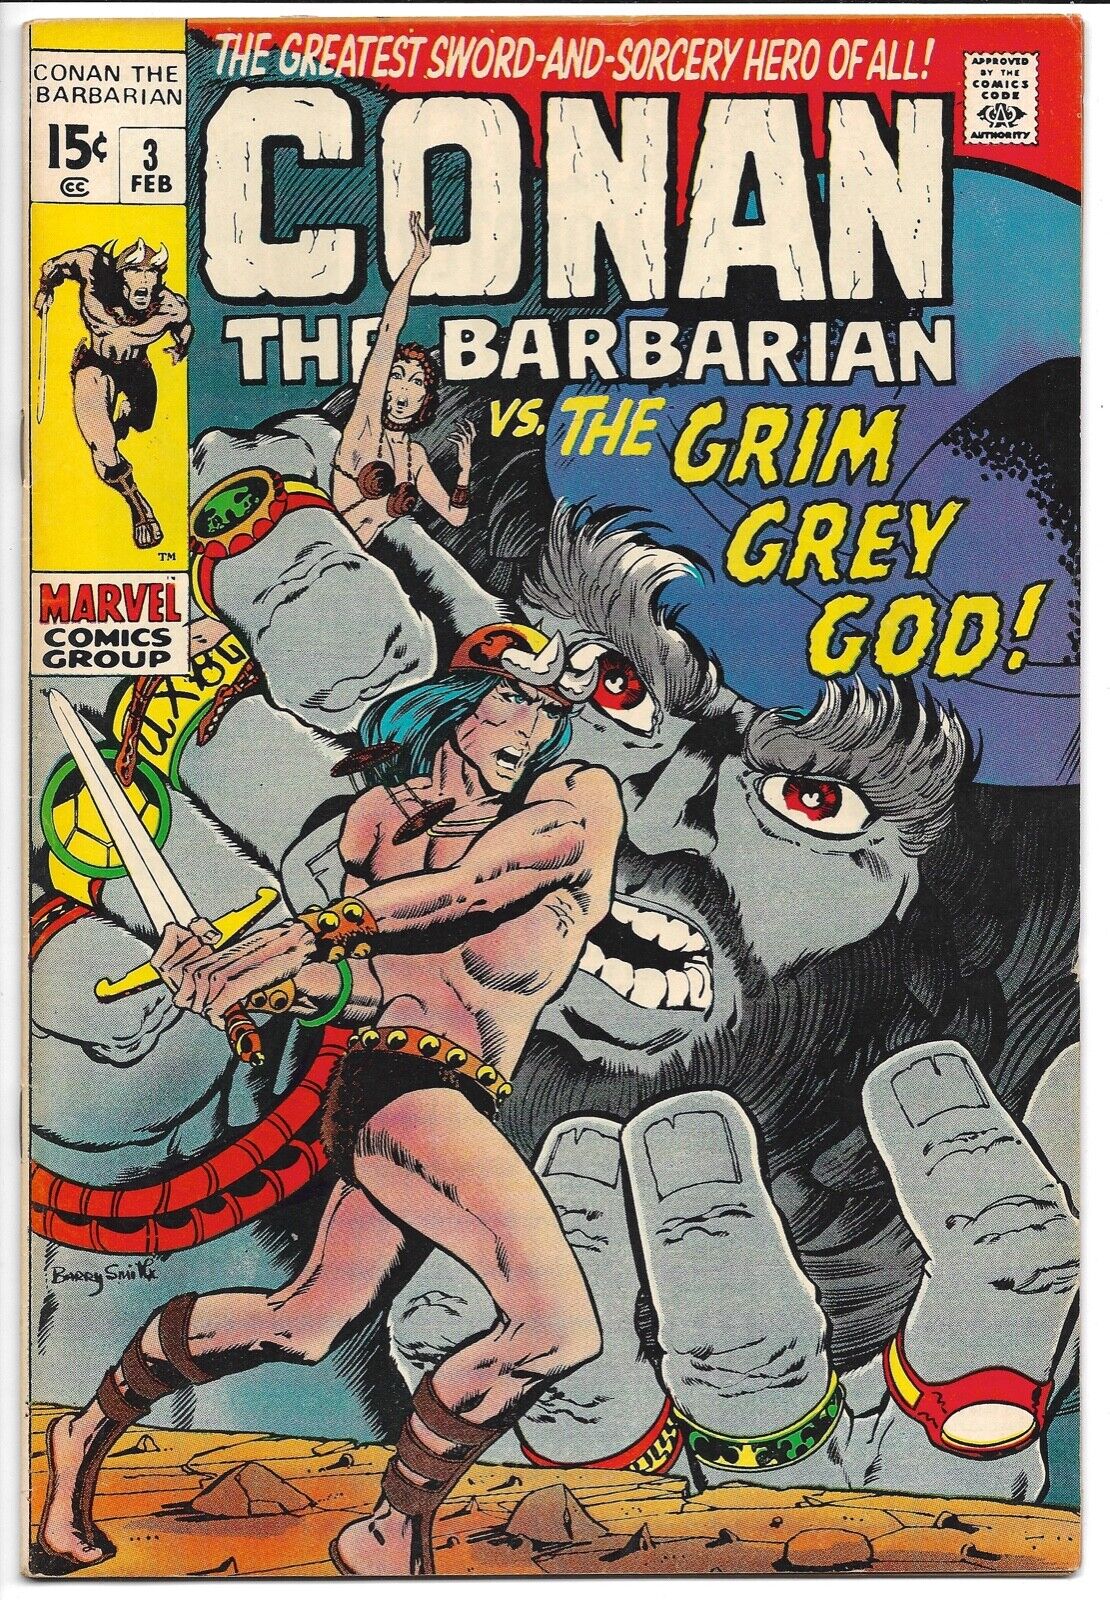 MARVEL CONAN THE BARBARIAN #3 Needs to be CGC\'d GRIM GREY GOD Perfect issue